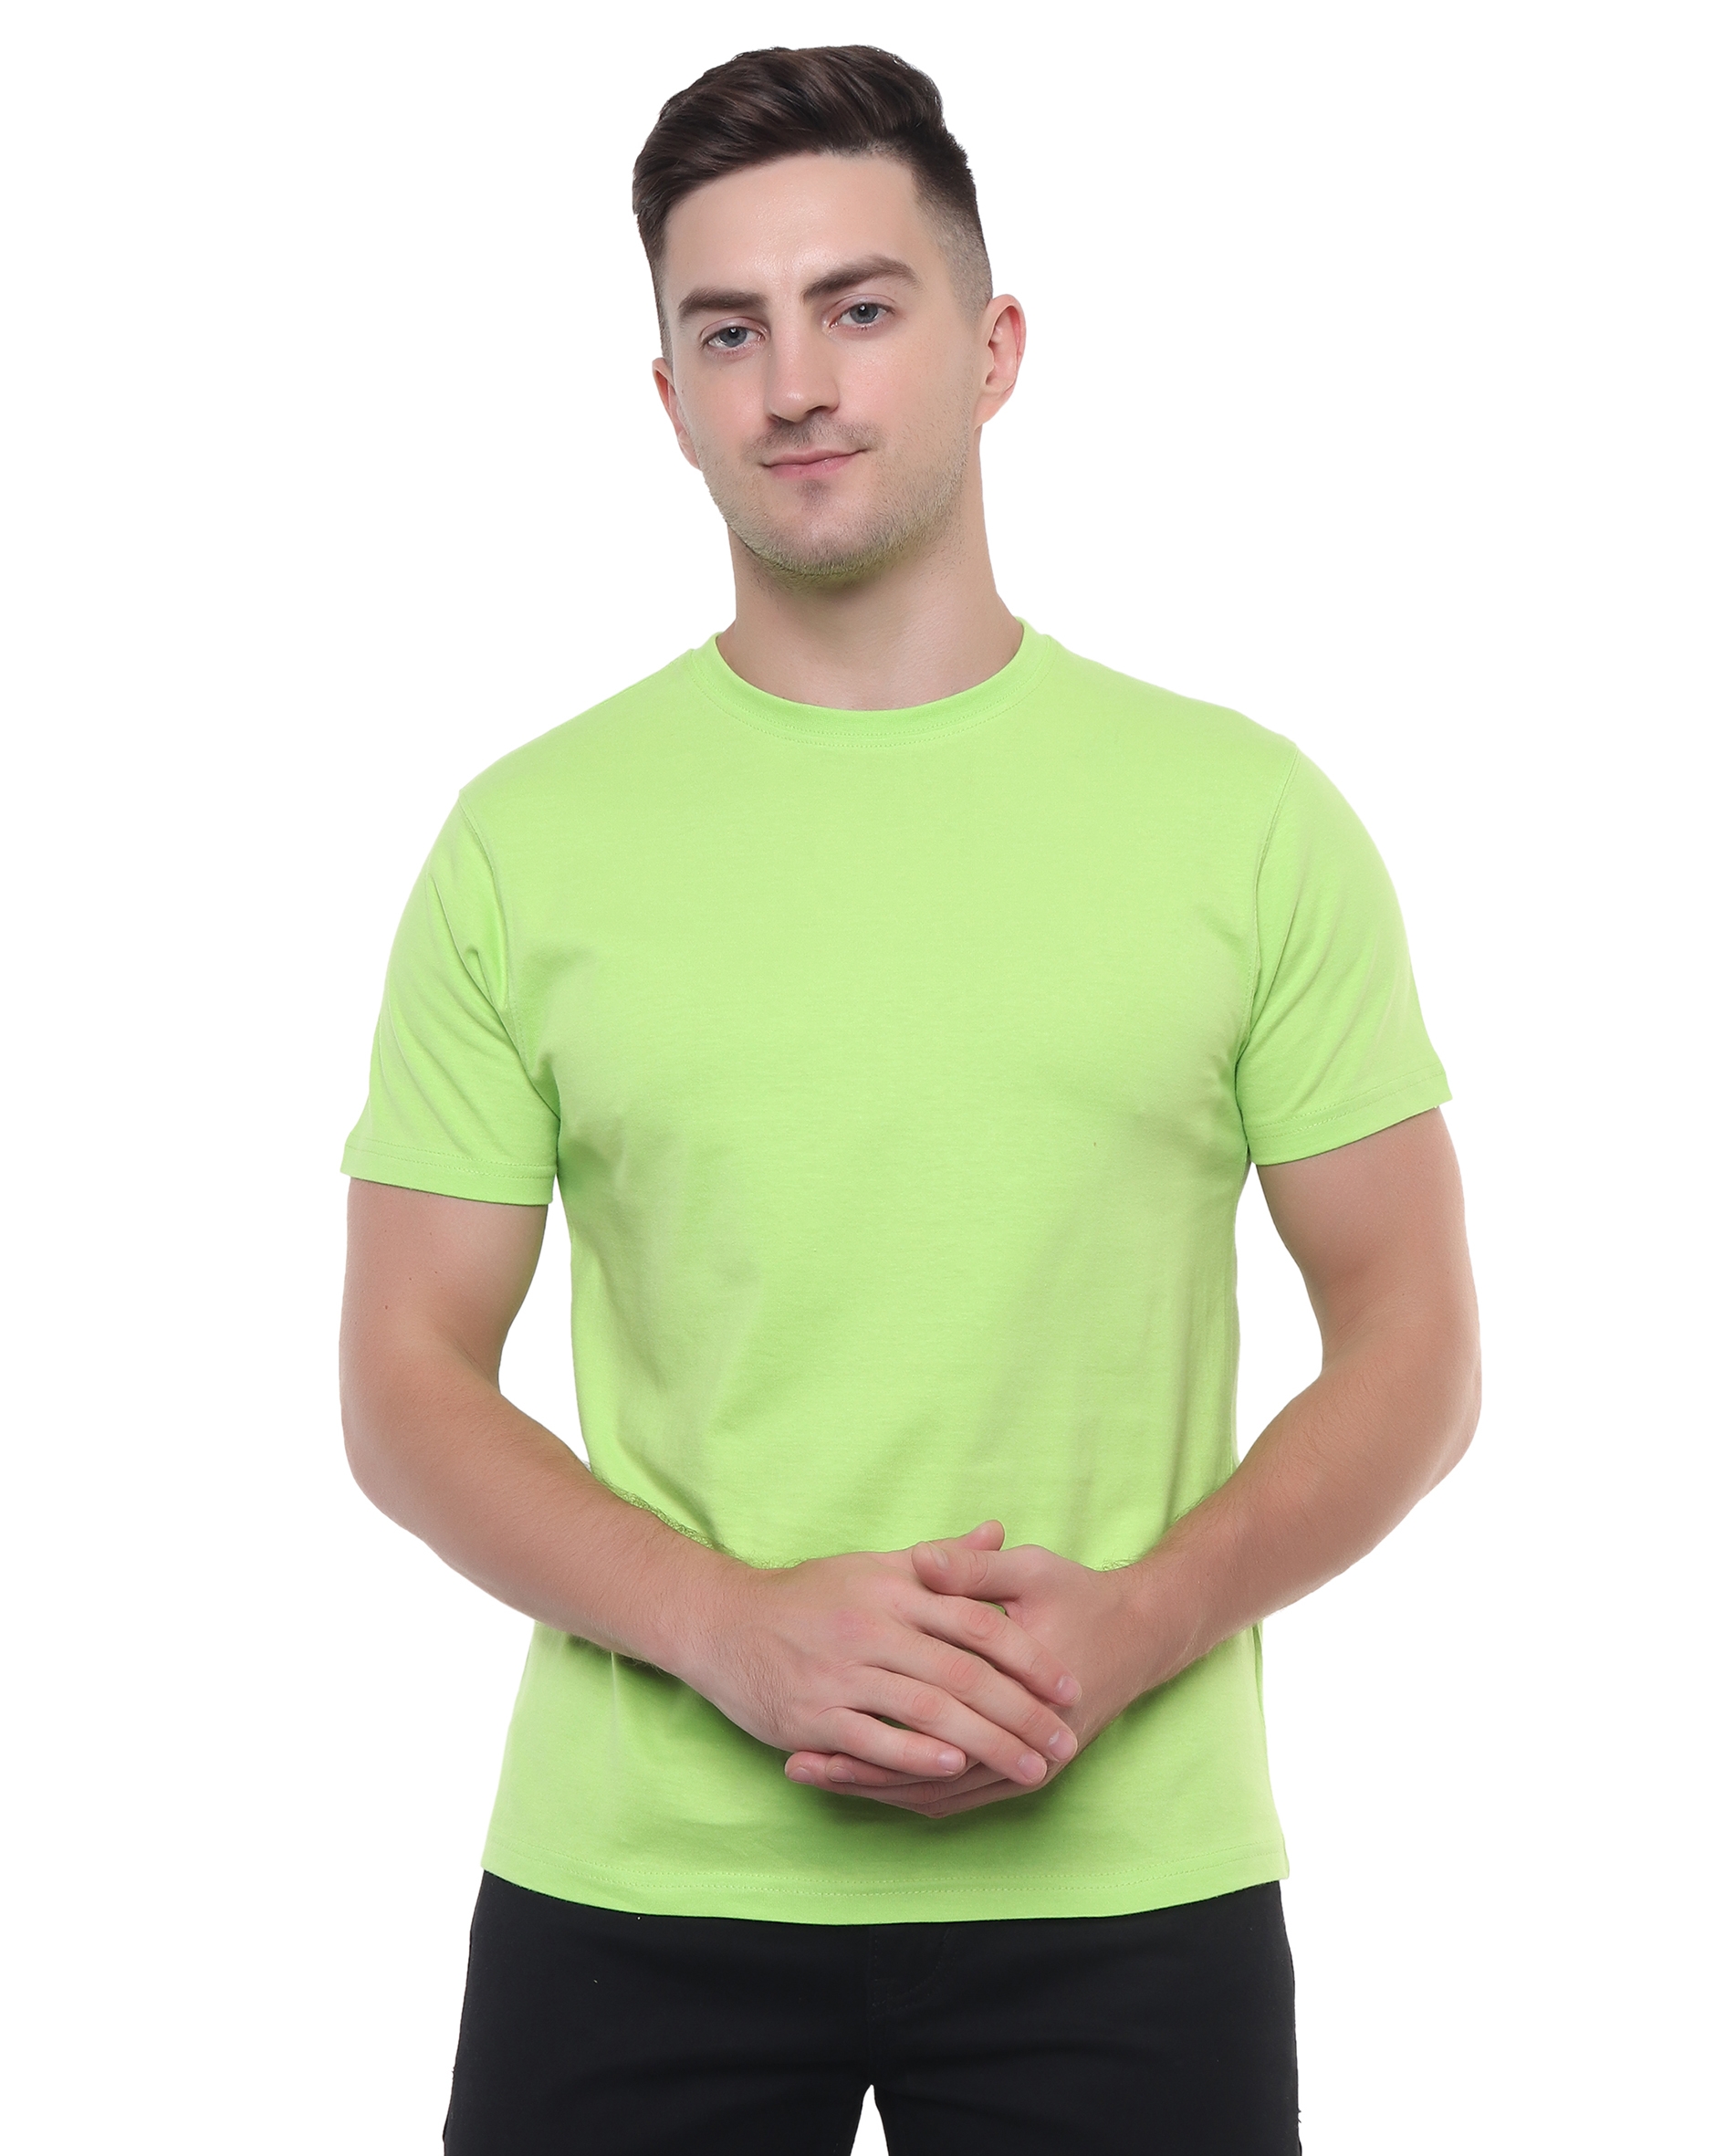 Chartreuse Green Round Neck T Shirt